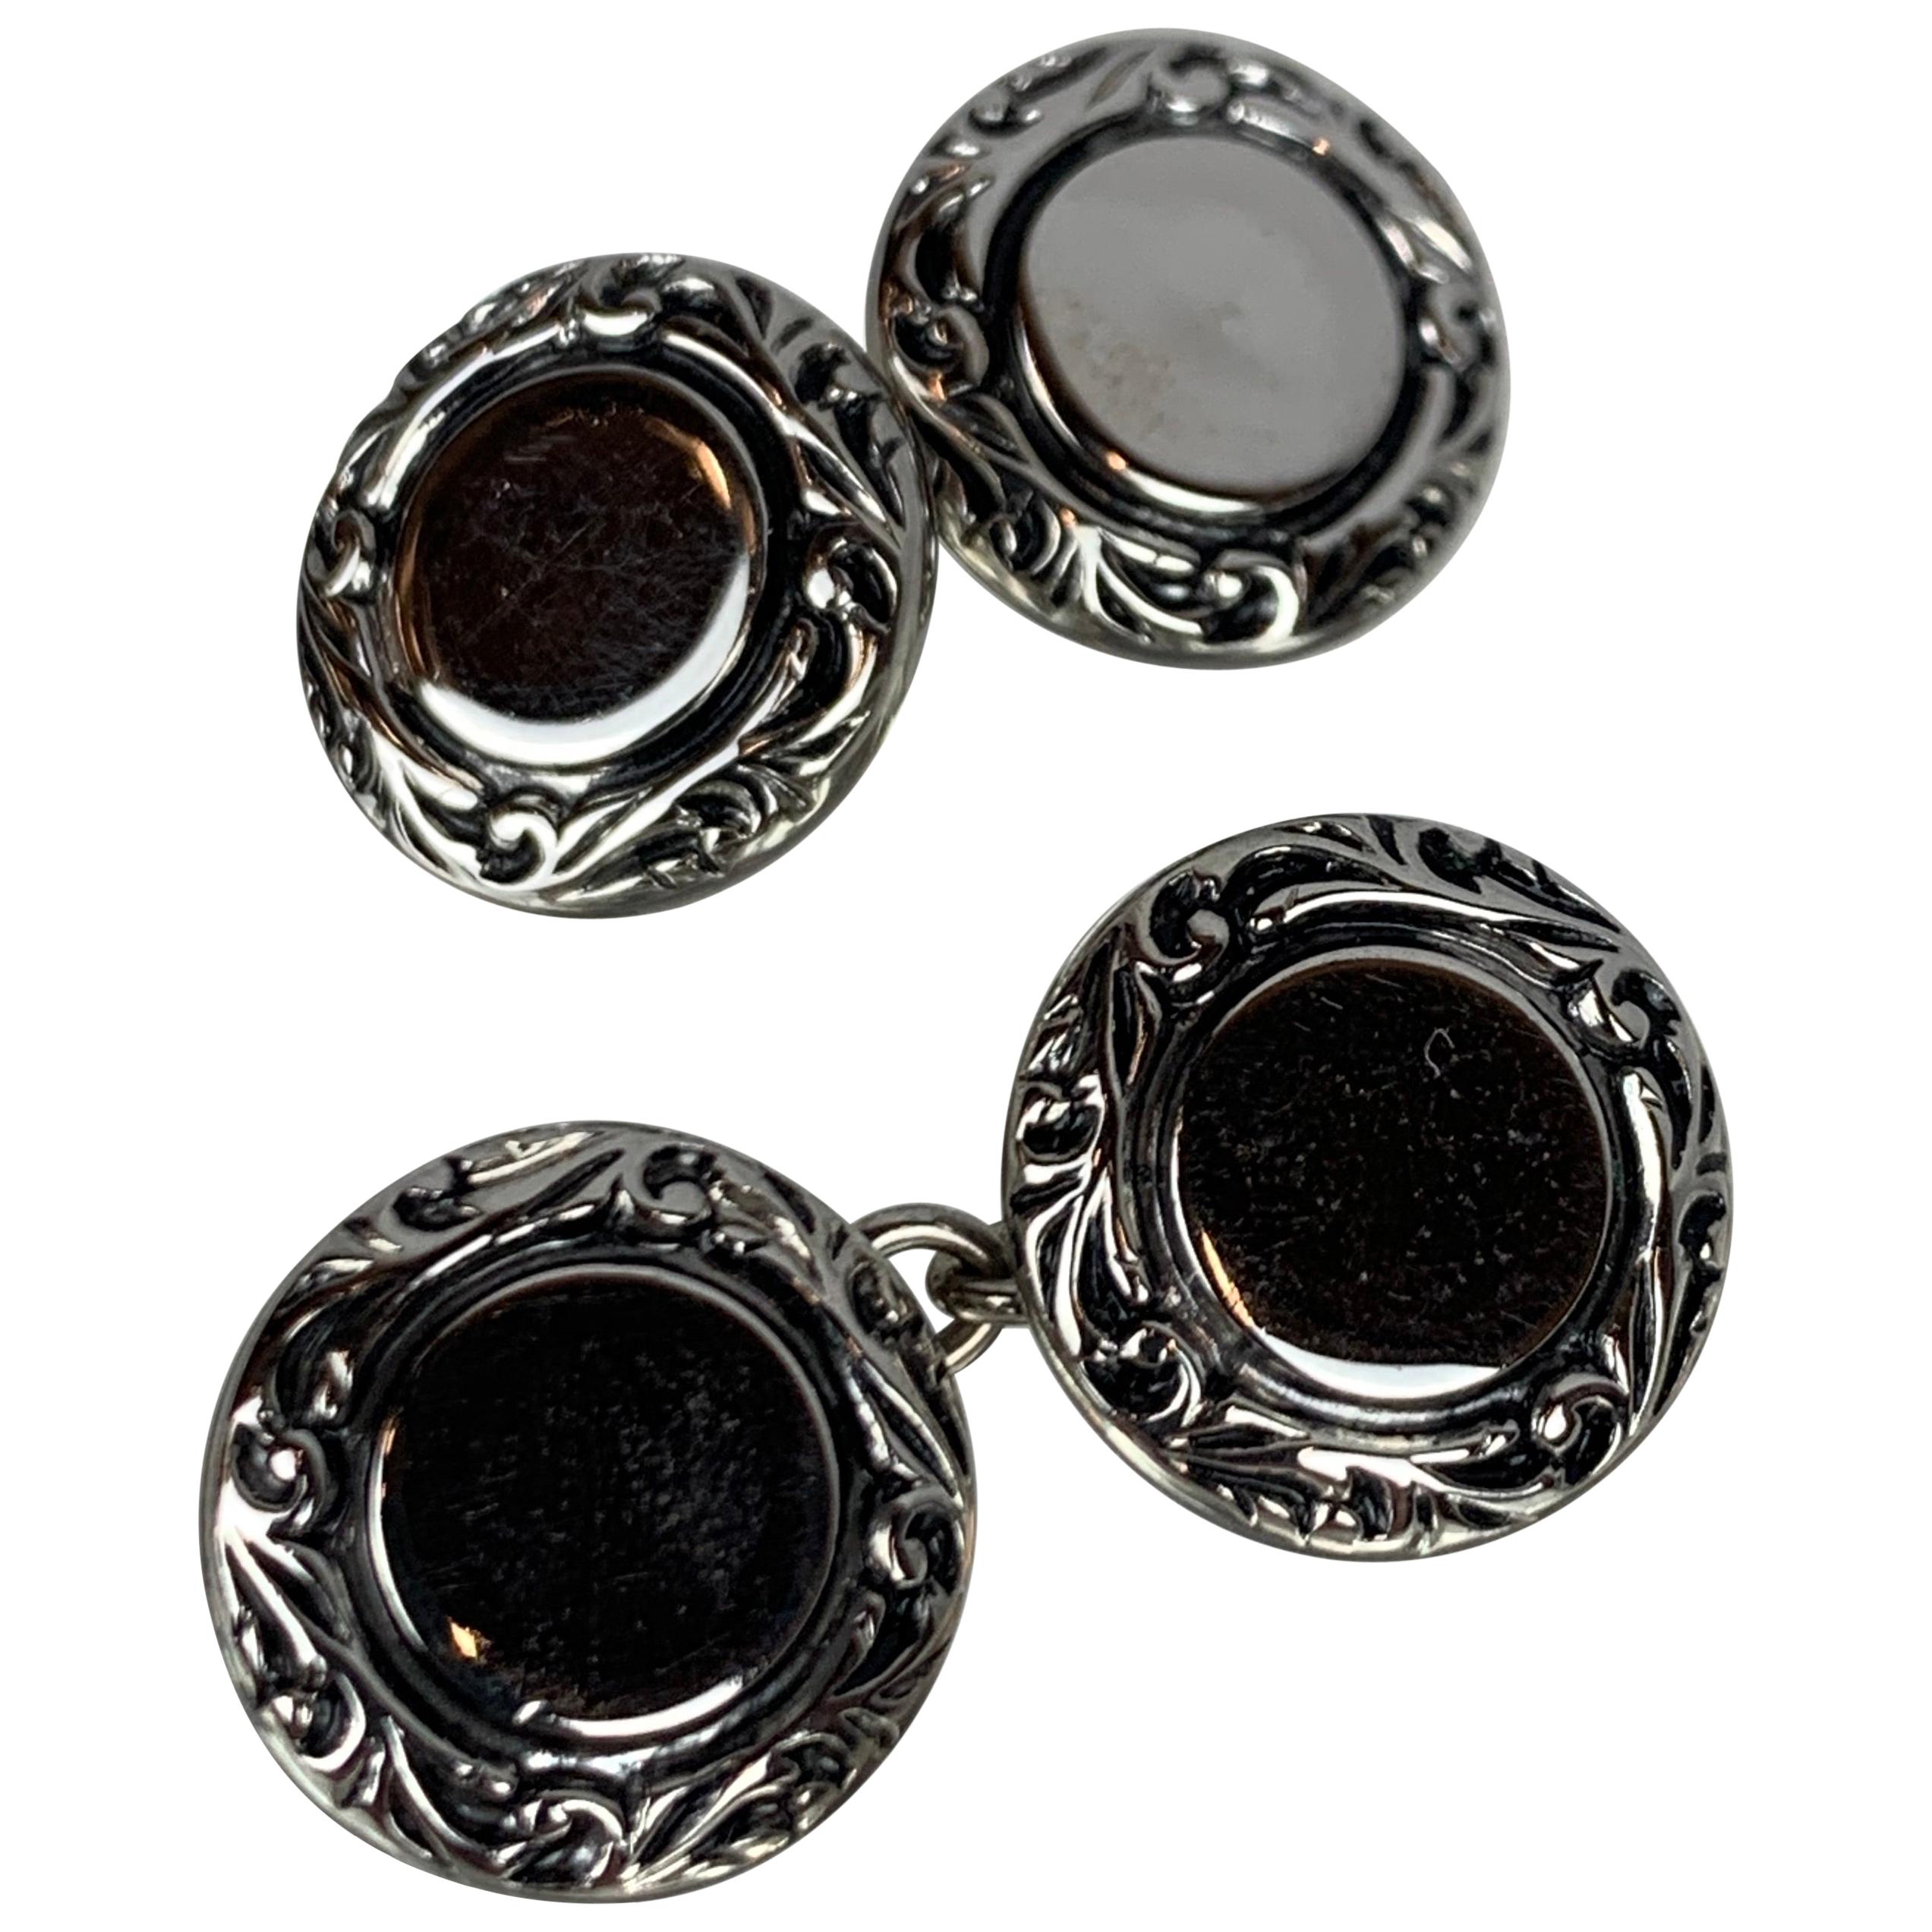 A Pair of Double Round Silver Tone Cufflinks with Scrolled Raised Borders For Sale 4